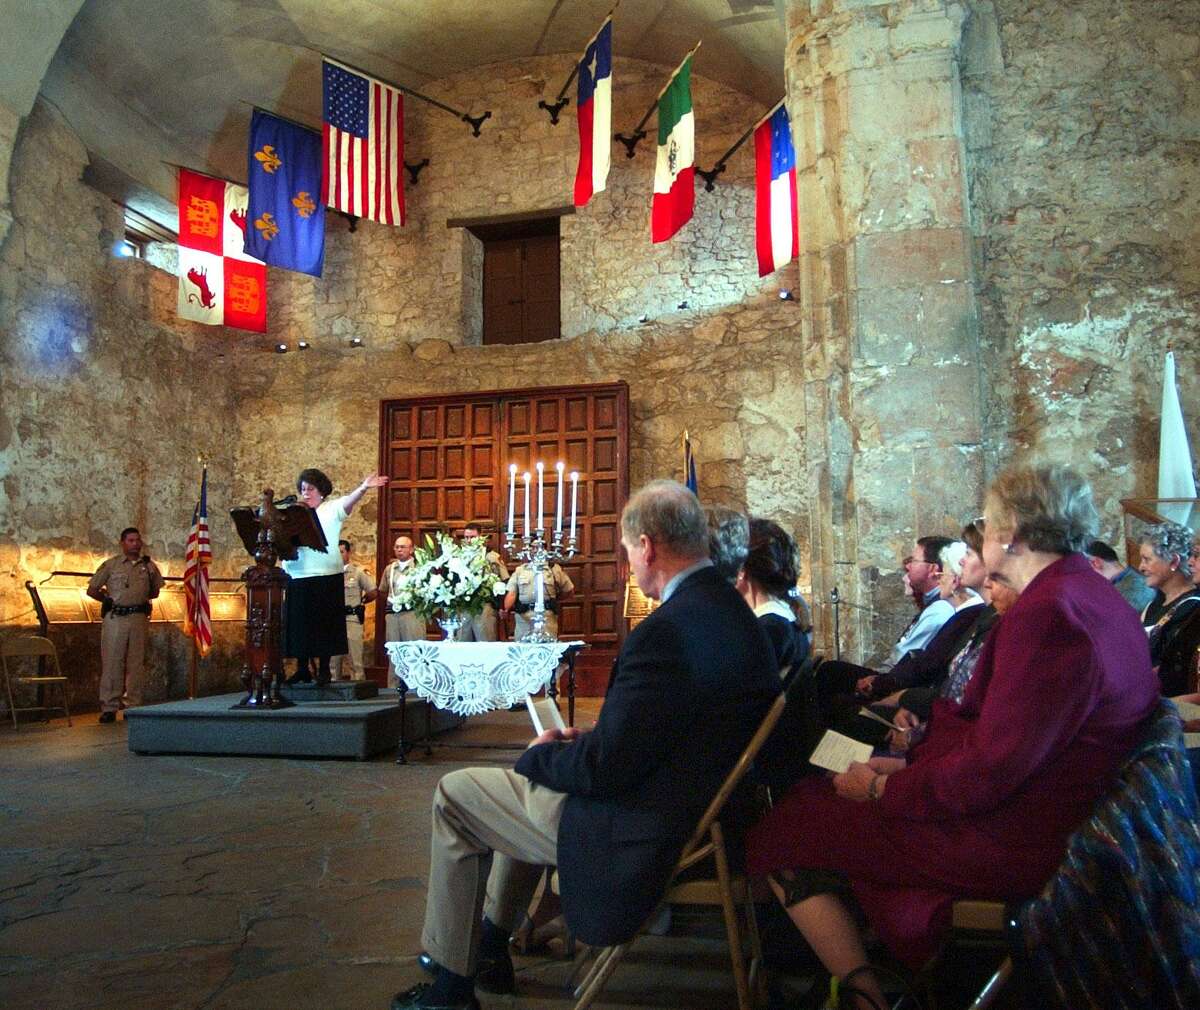 Dora Elizondo Guerra addresses guests on March 6, 2002, at the DRT's annual memorial service commemorating the 166th anniversary of the battle.